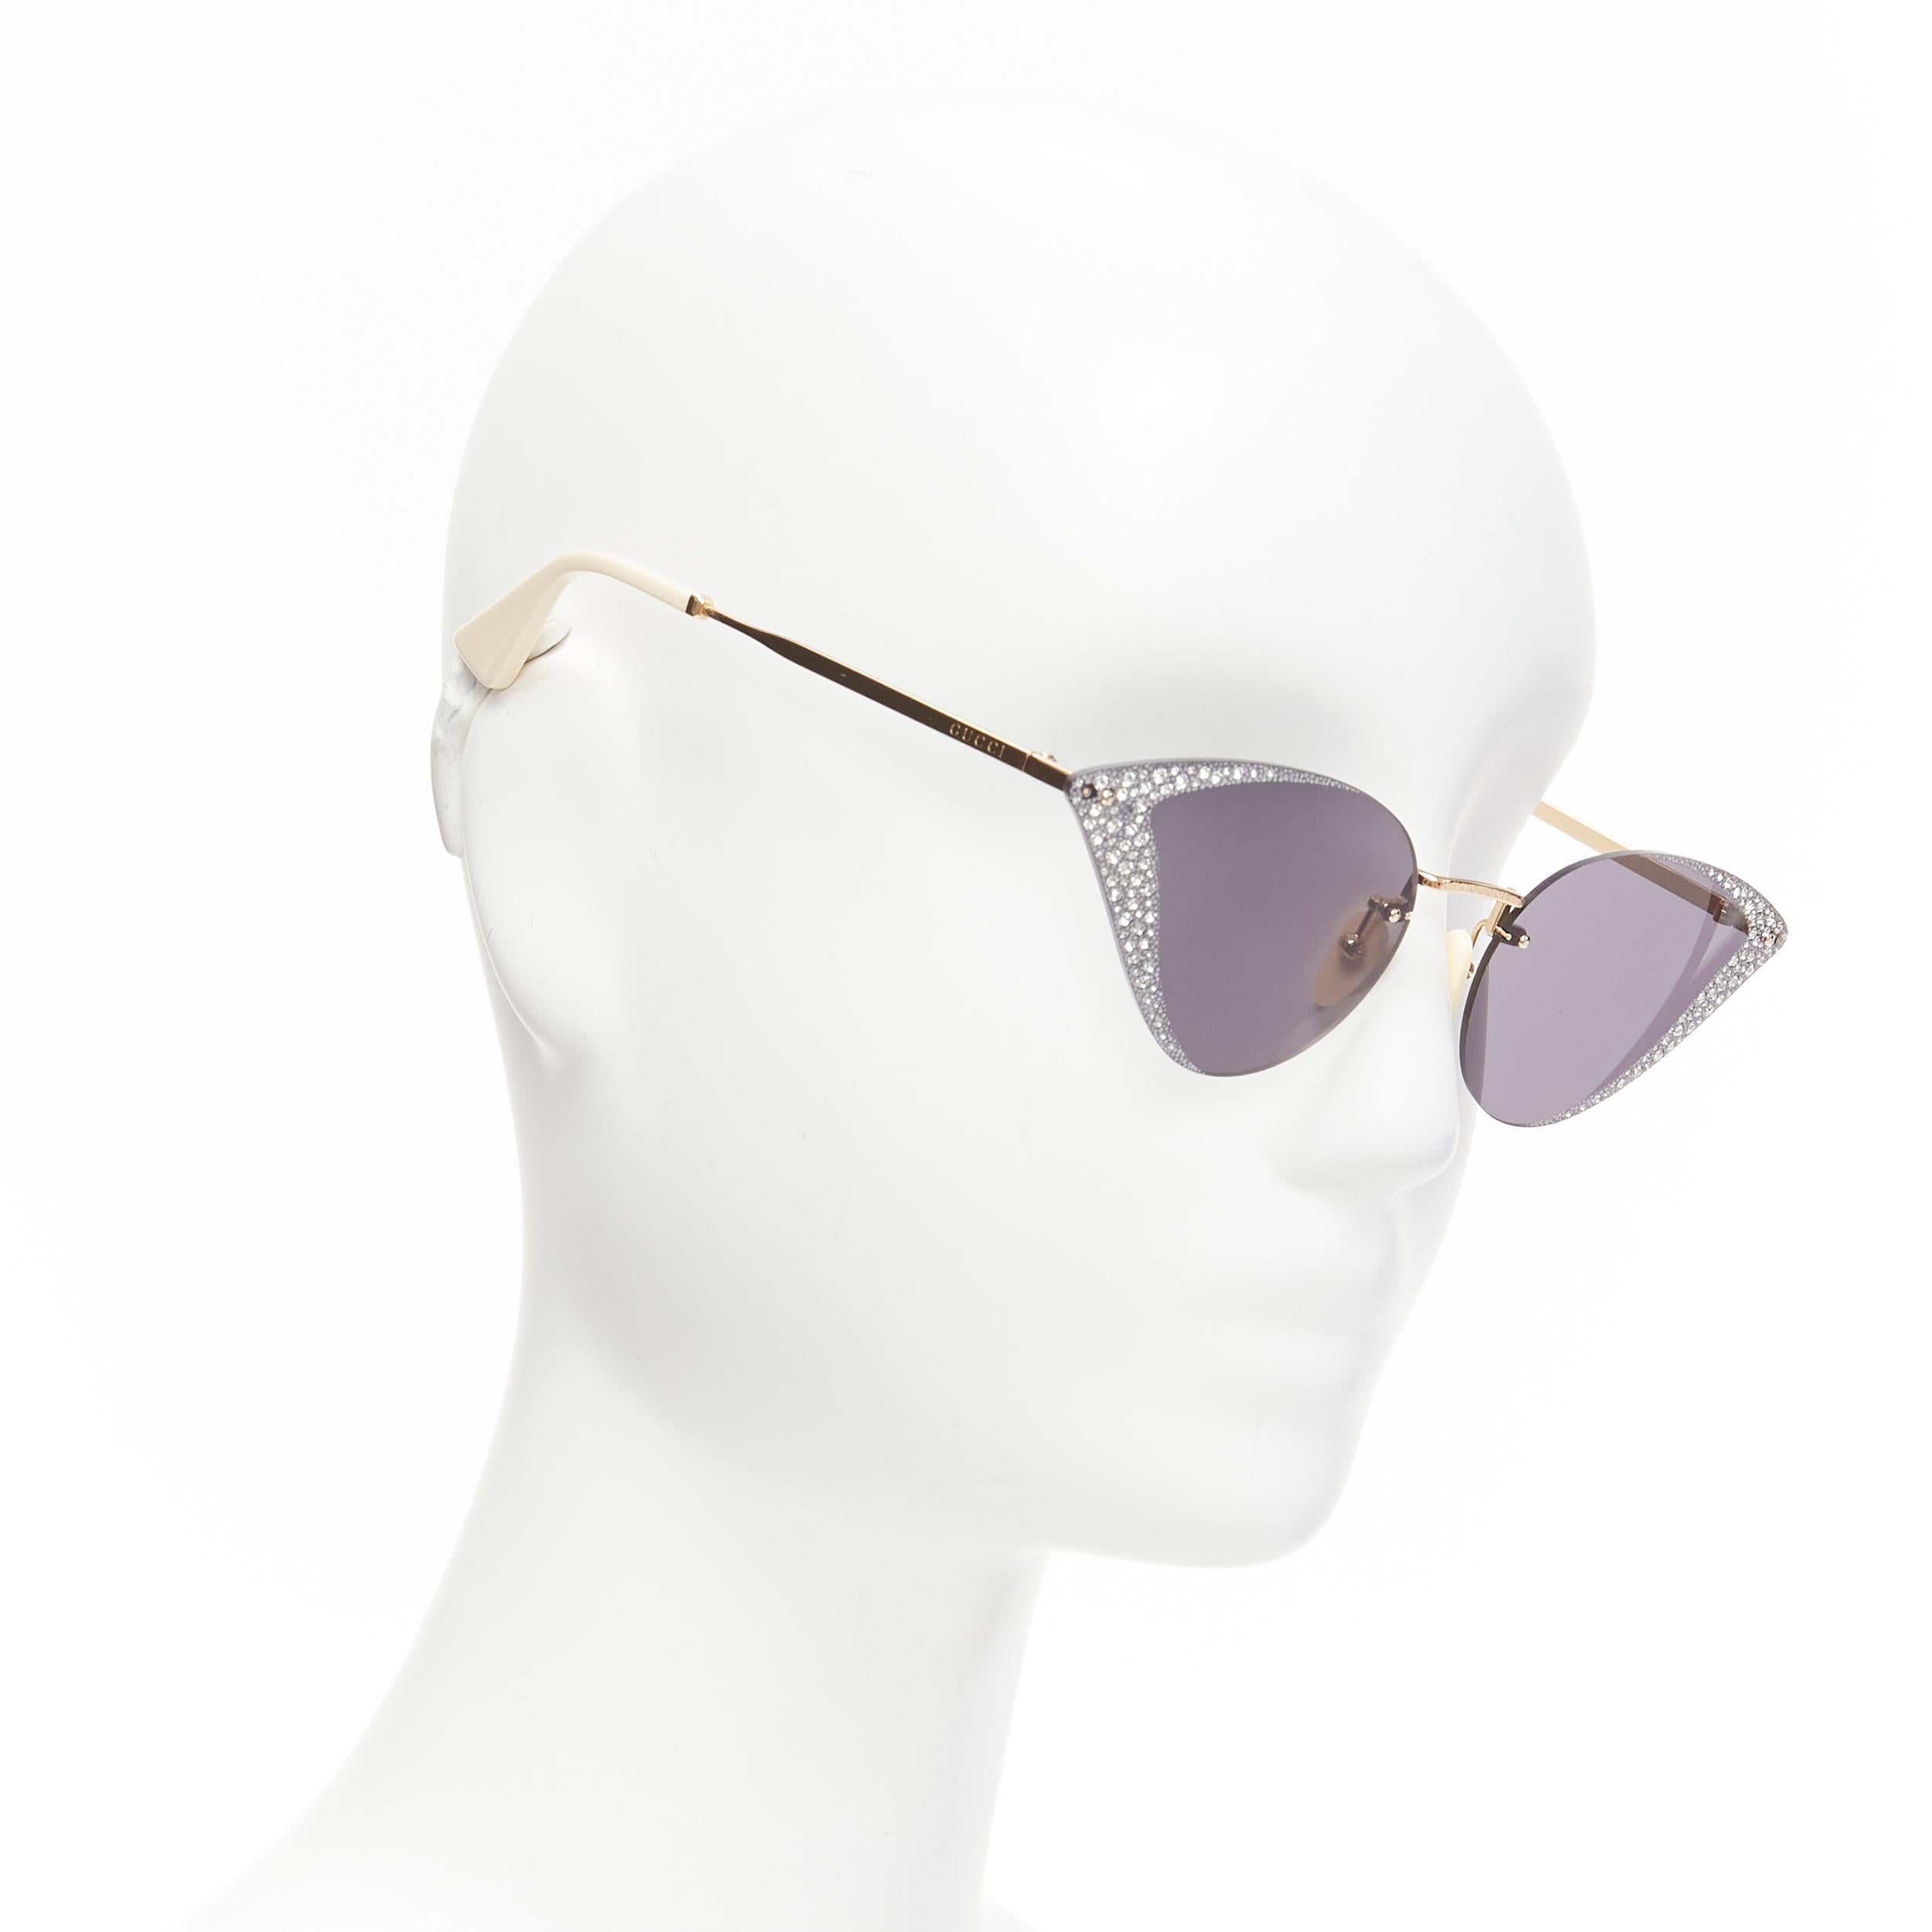 GUCCI Hollywood Forever GG0898S silver crystal black cat eye sunglasses
Reference: TGAS/D01049
Brand: Gucci
Designer: Alessandro Michele
Model: GG0898S
Collection: Hollywood Forever
Material: Metal
Color: Gold, Black
Pattern: Crystals
Lining: Gold